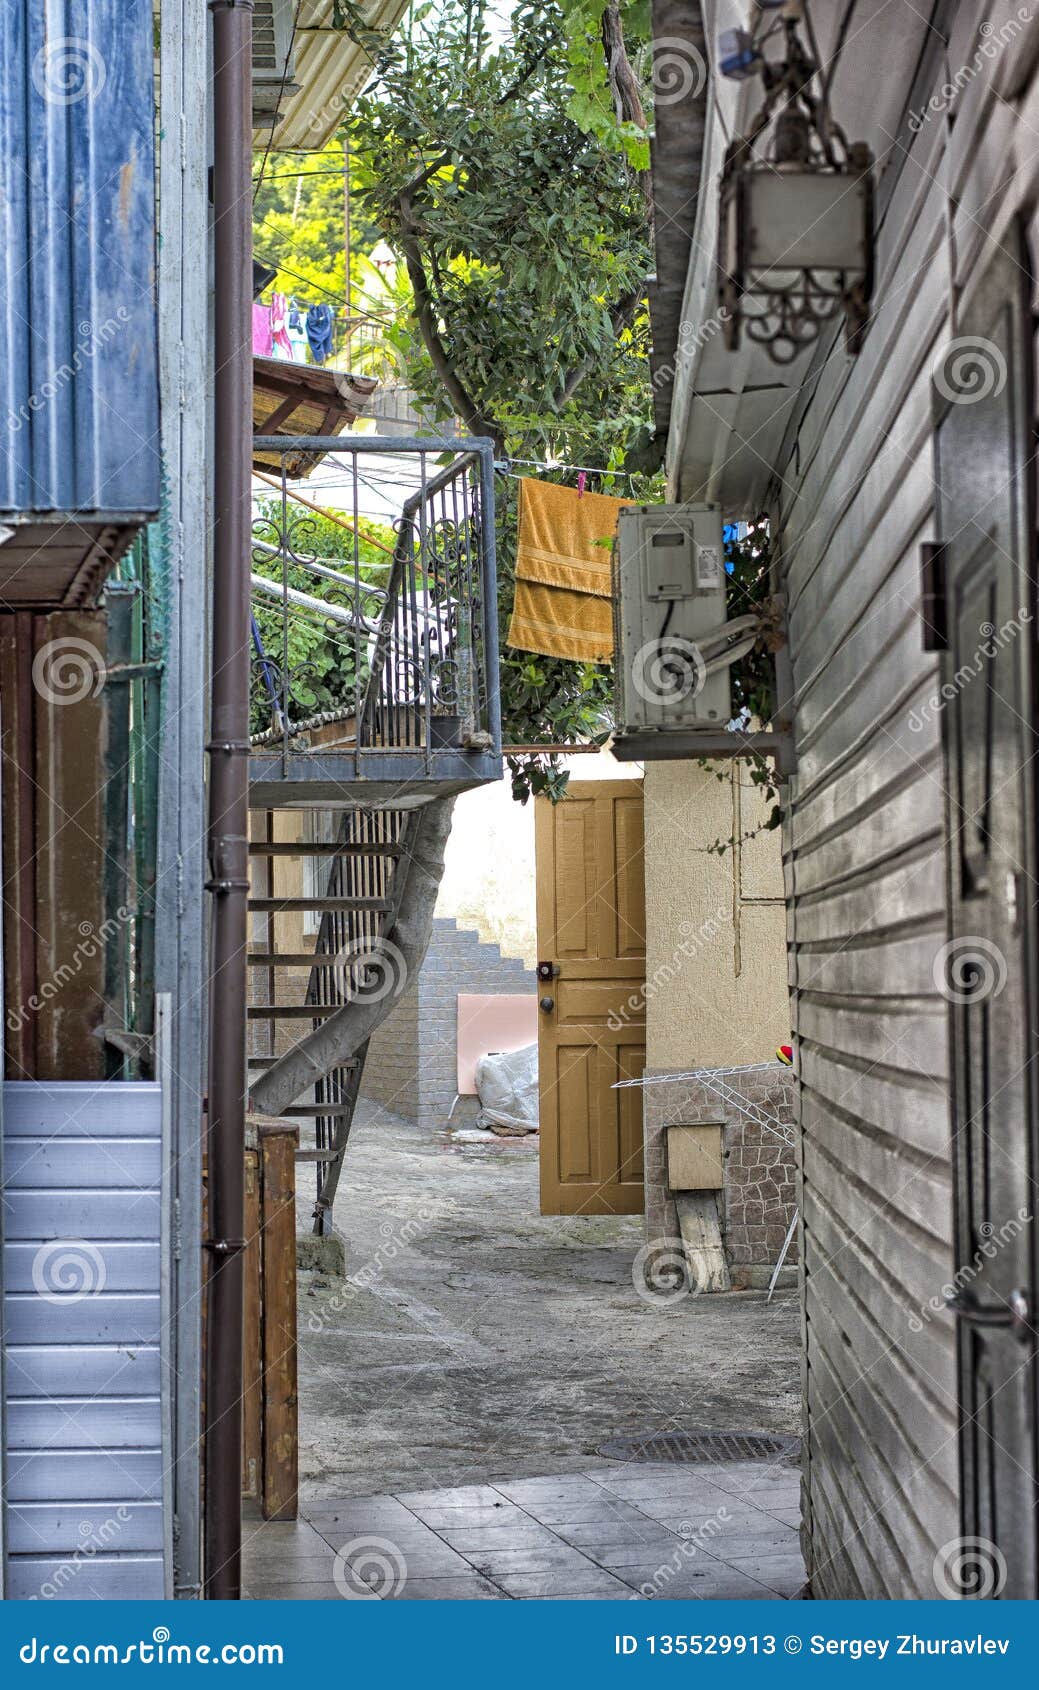 Close Courtyard In A Residential Urban Area Stock Image 